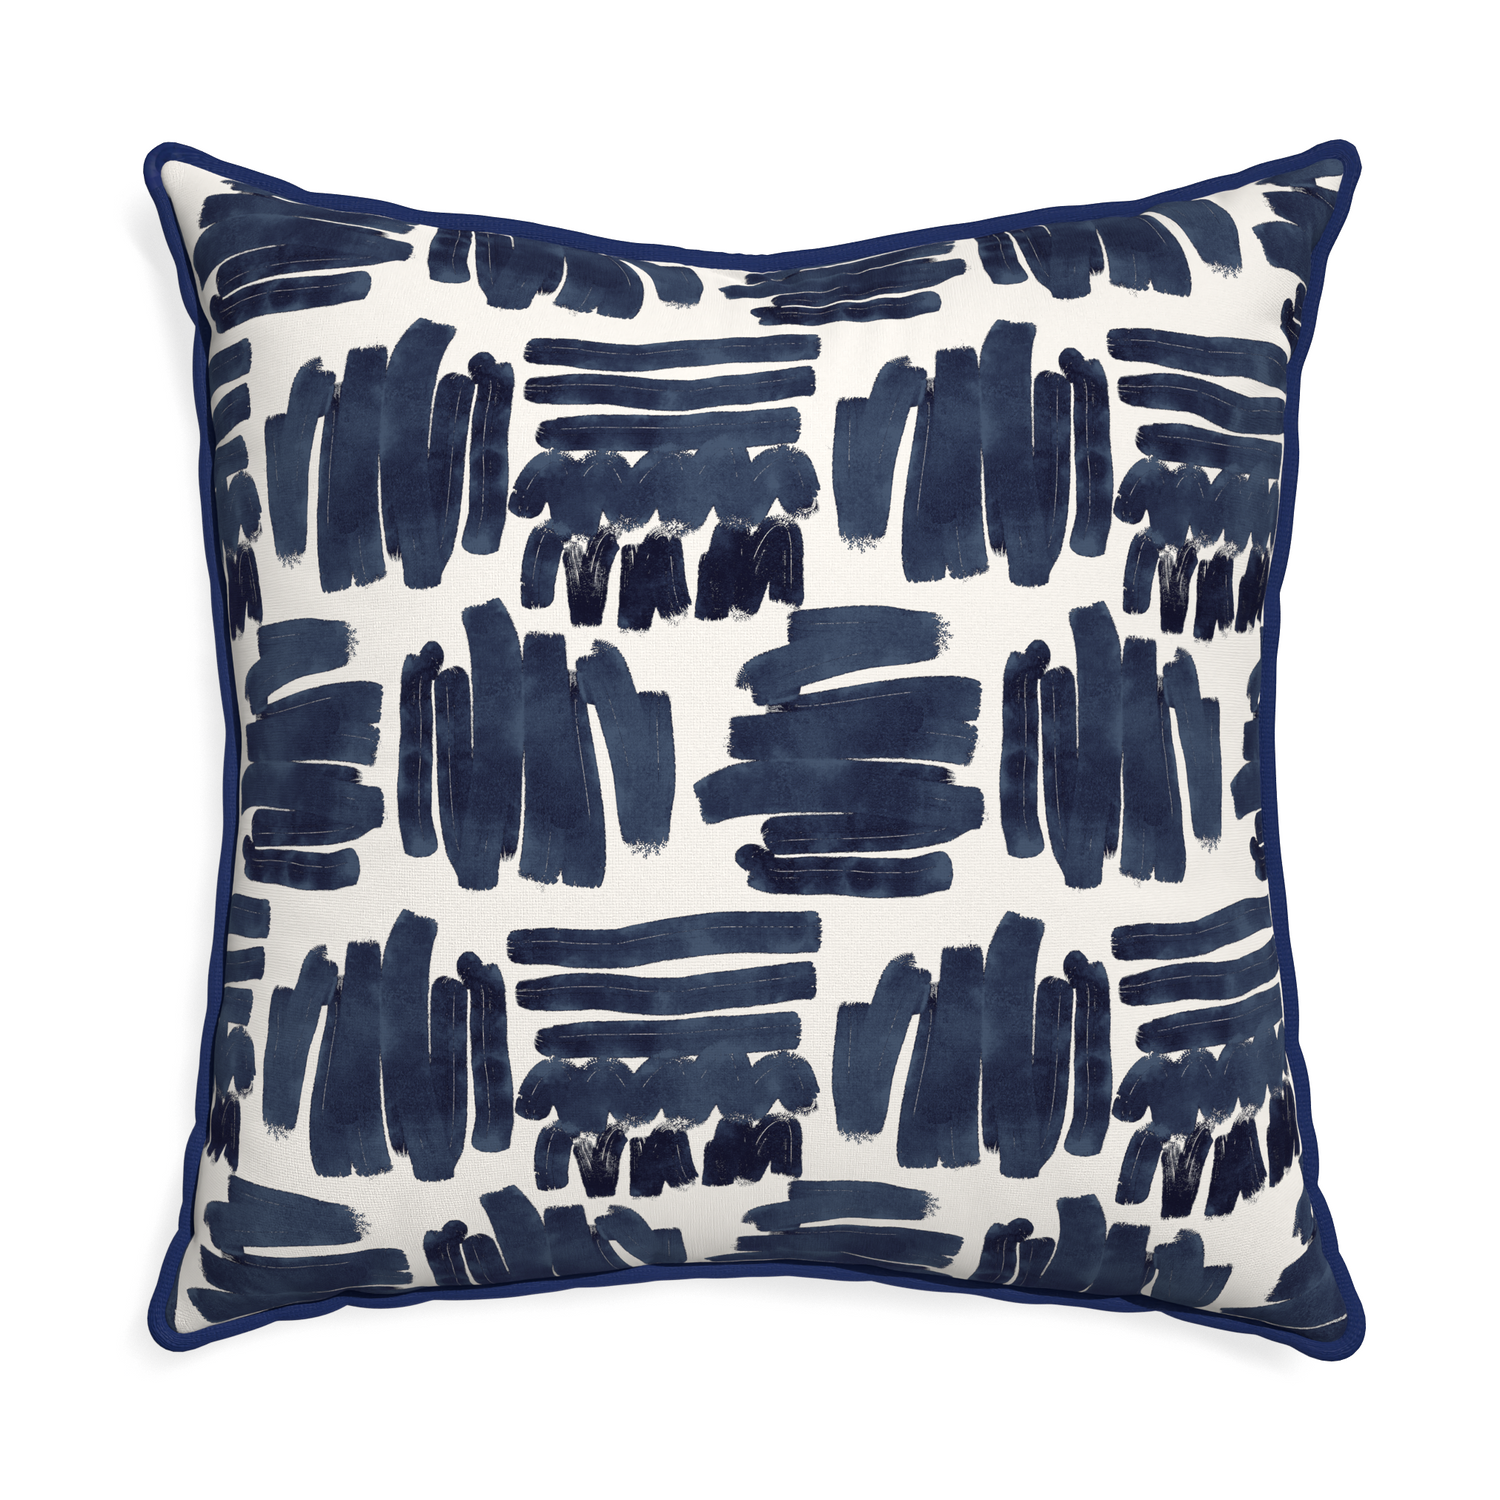 Euro-sham warby custom pillow with midnight piping on white background